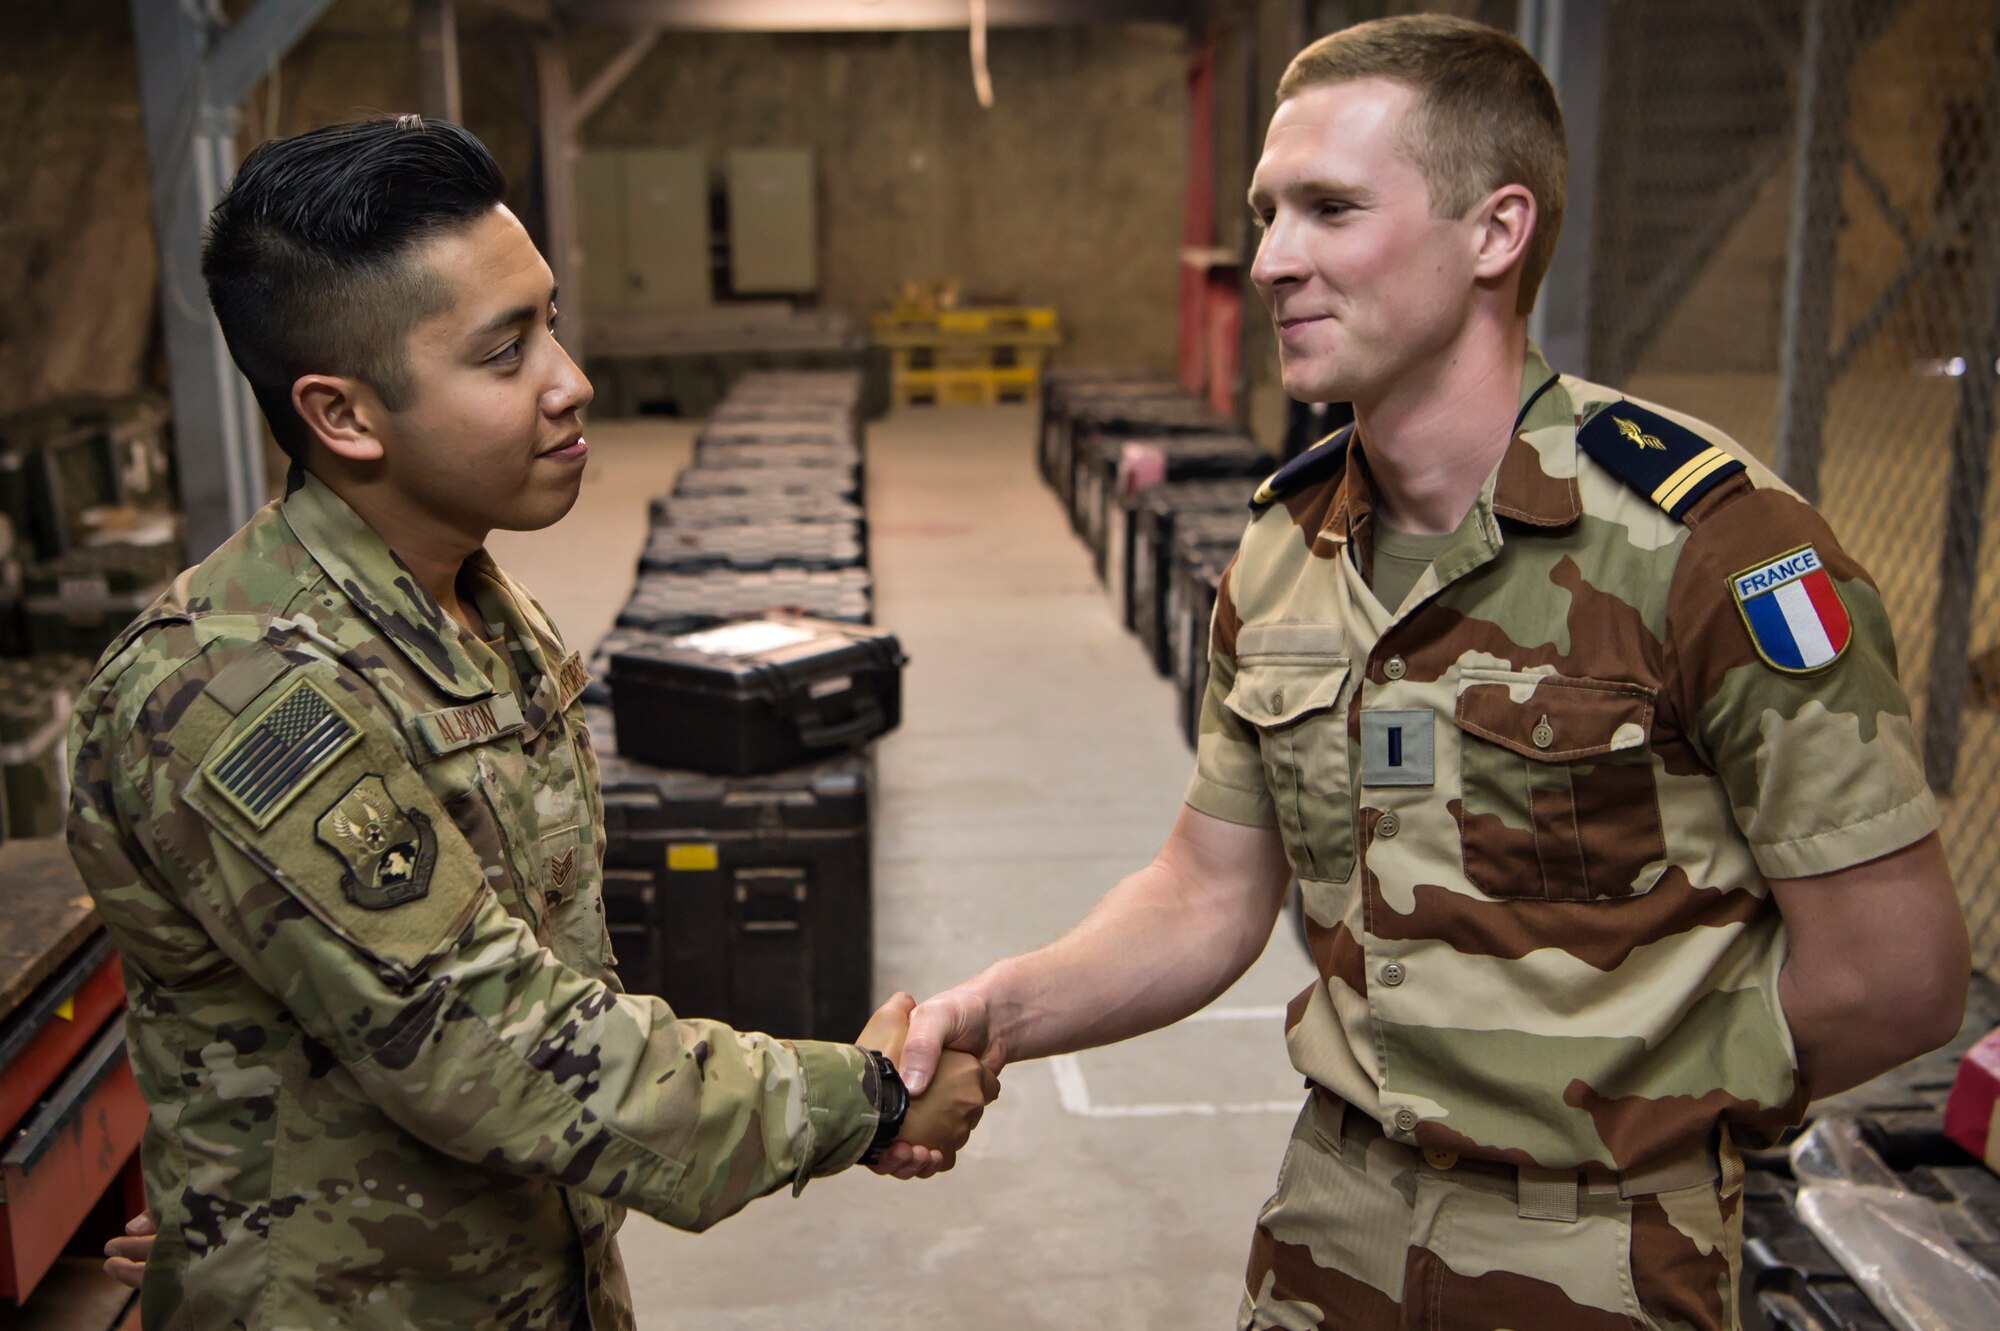 Staff Sgt. Aldrin Alarcon, 379th Expeditionary Communications Squadron (ECS) plans and requirements manager, shakes hands with French Air Force 1st Lt. Simon, engineering officer, after installating communication assets for a French Air Force detachment facility Feb. 26, 2019, at Al Udeid Air Base, Qatar. Alarcon is part of a “beddown” team that enables power projection by establishing communications capabilities such as networks, Voice over Internet Protocol telephones, and radios from the ground up (U.S. Air Force photo by Tech. Sgt. Christopher Hubenthal)